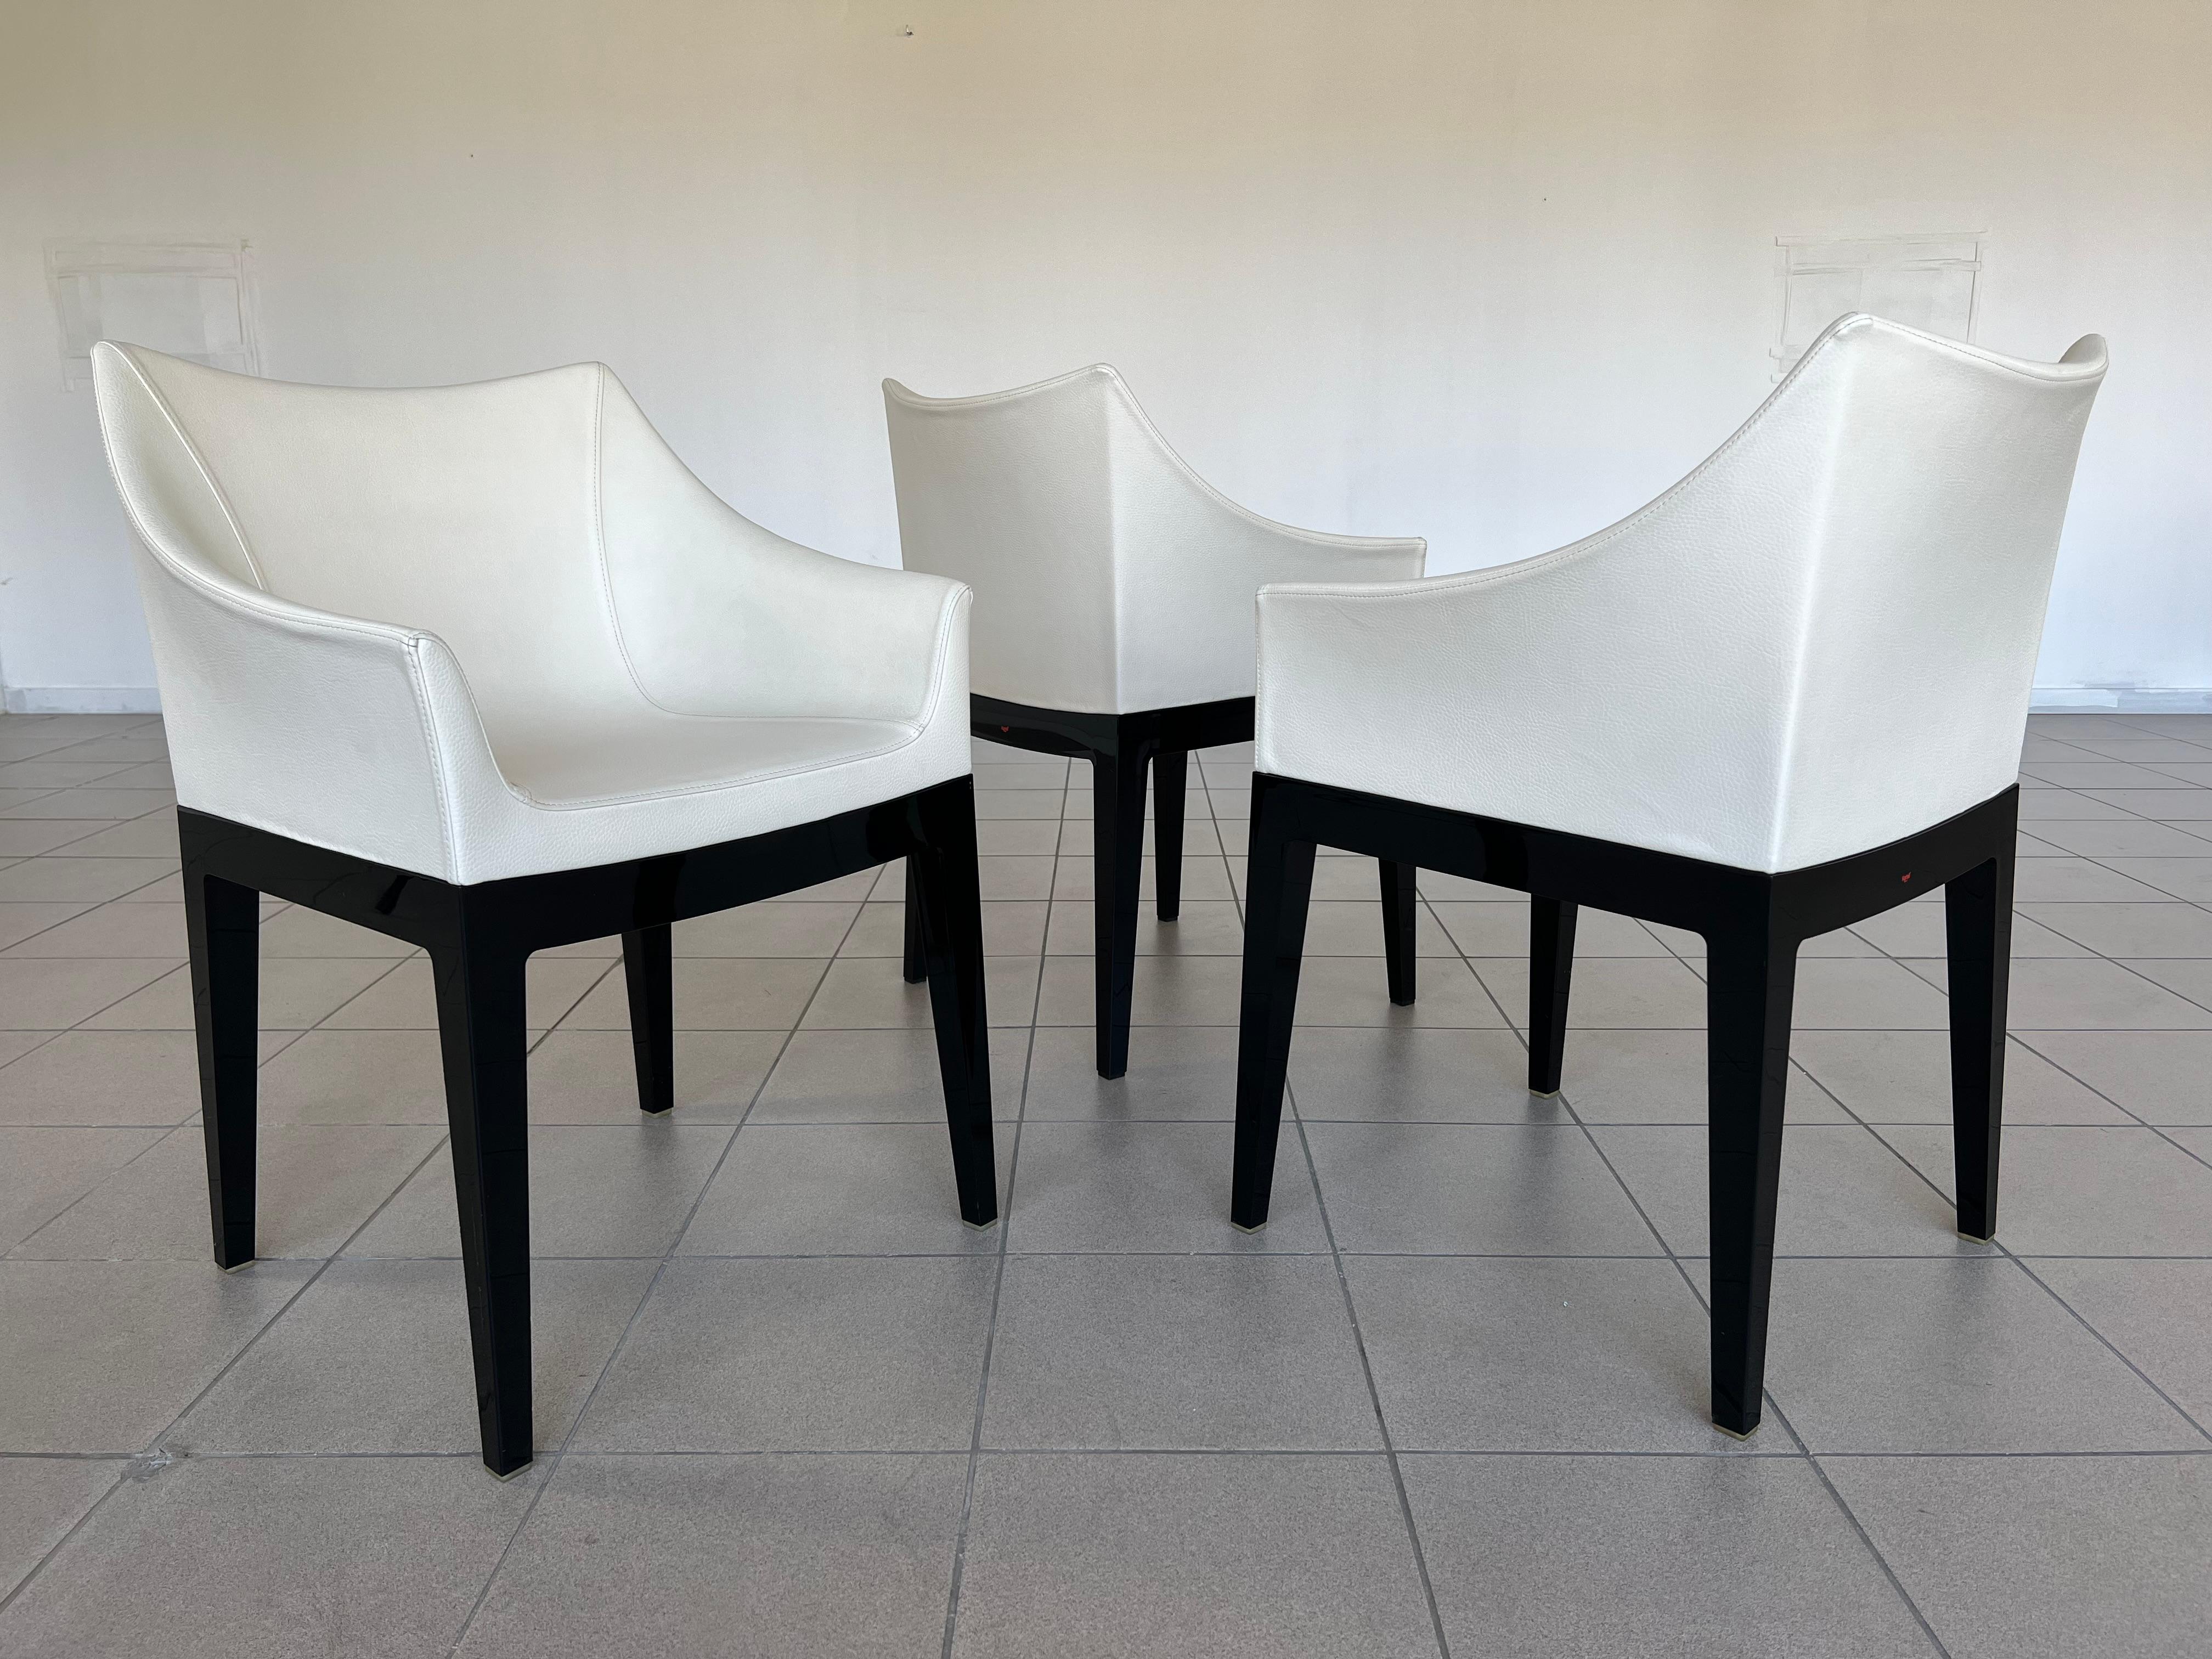 Original Mademoiselle Leather Chairs by Philippe Starck for Kartell - Set of 5 For Sale 10